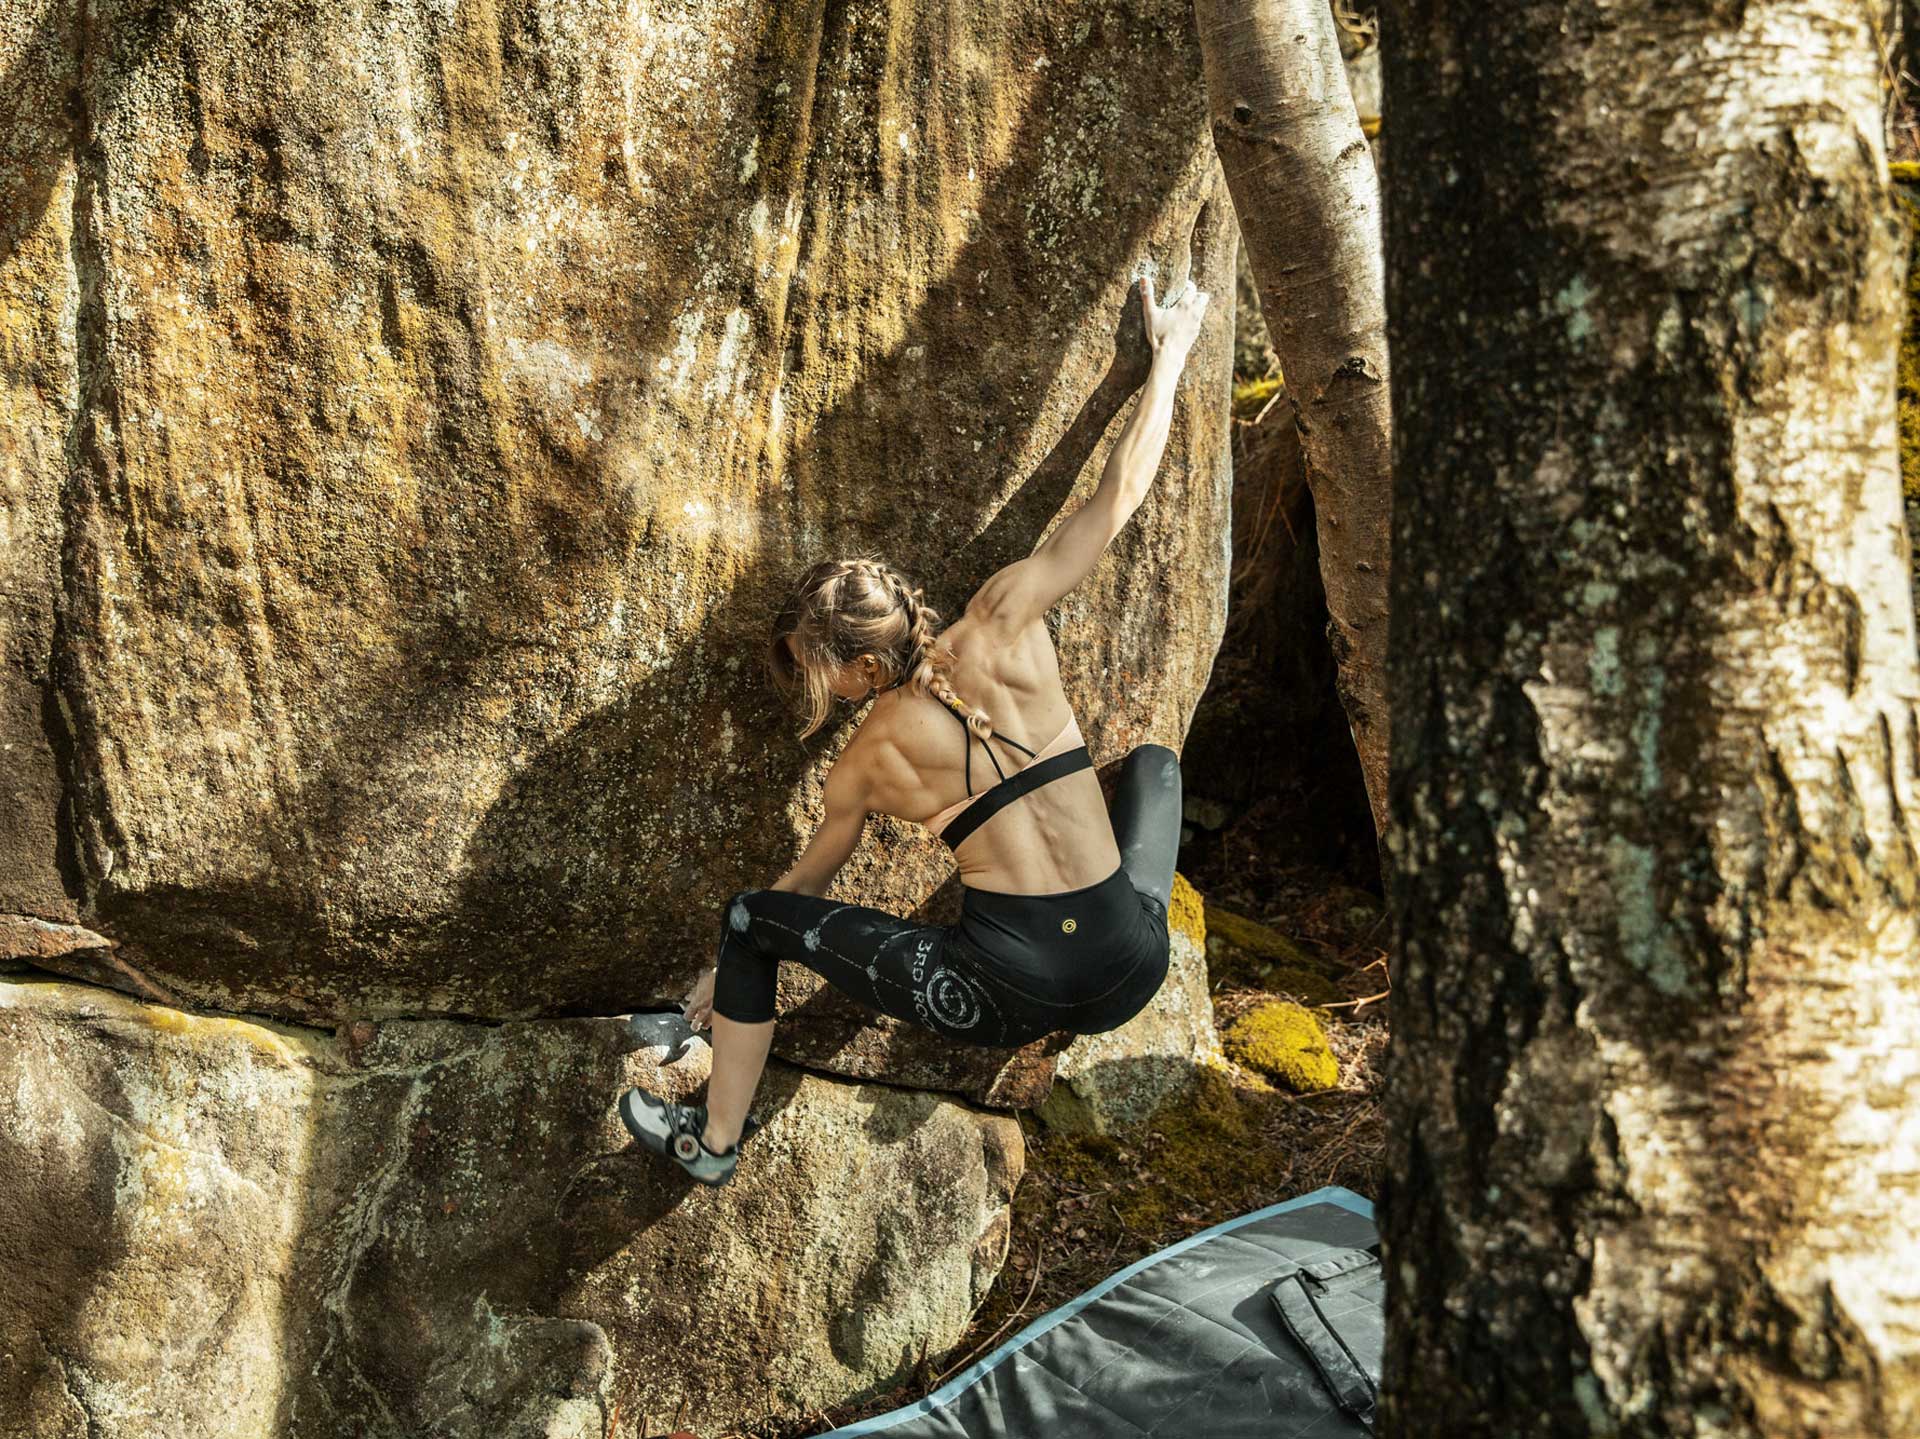 Are Injuries More Likely in Bouldering? – 3RD ROCK